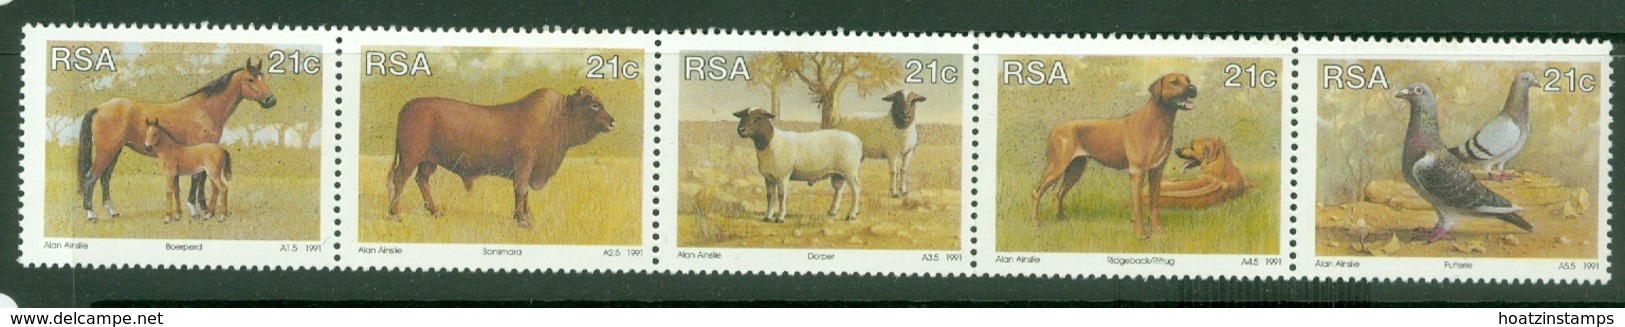 South Africa: 1991   Animal Breeding In South Africa    MNH Strip Of 5 - Unused Stamps